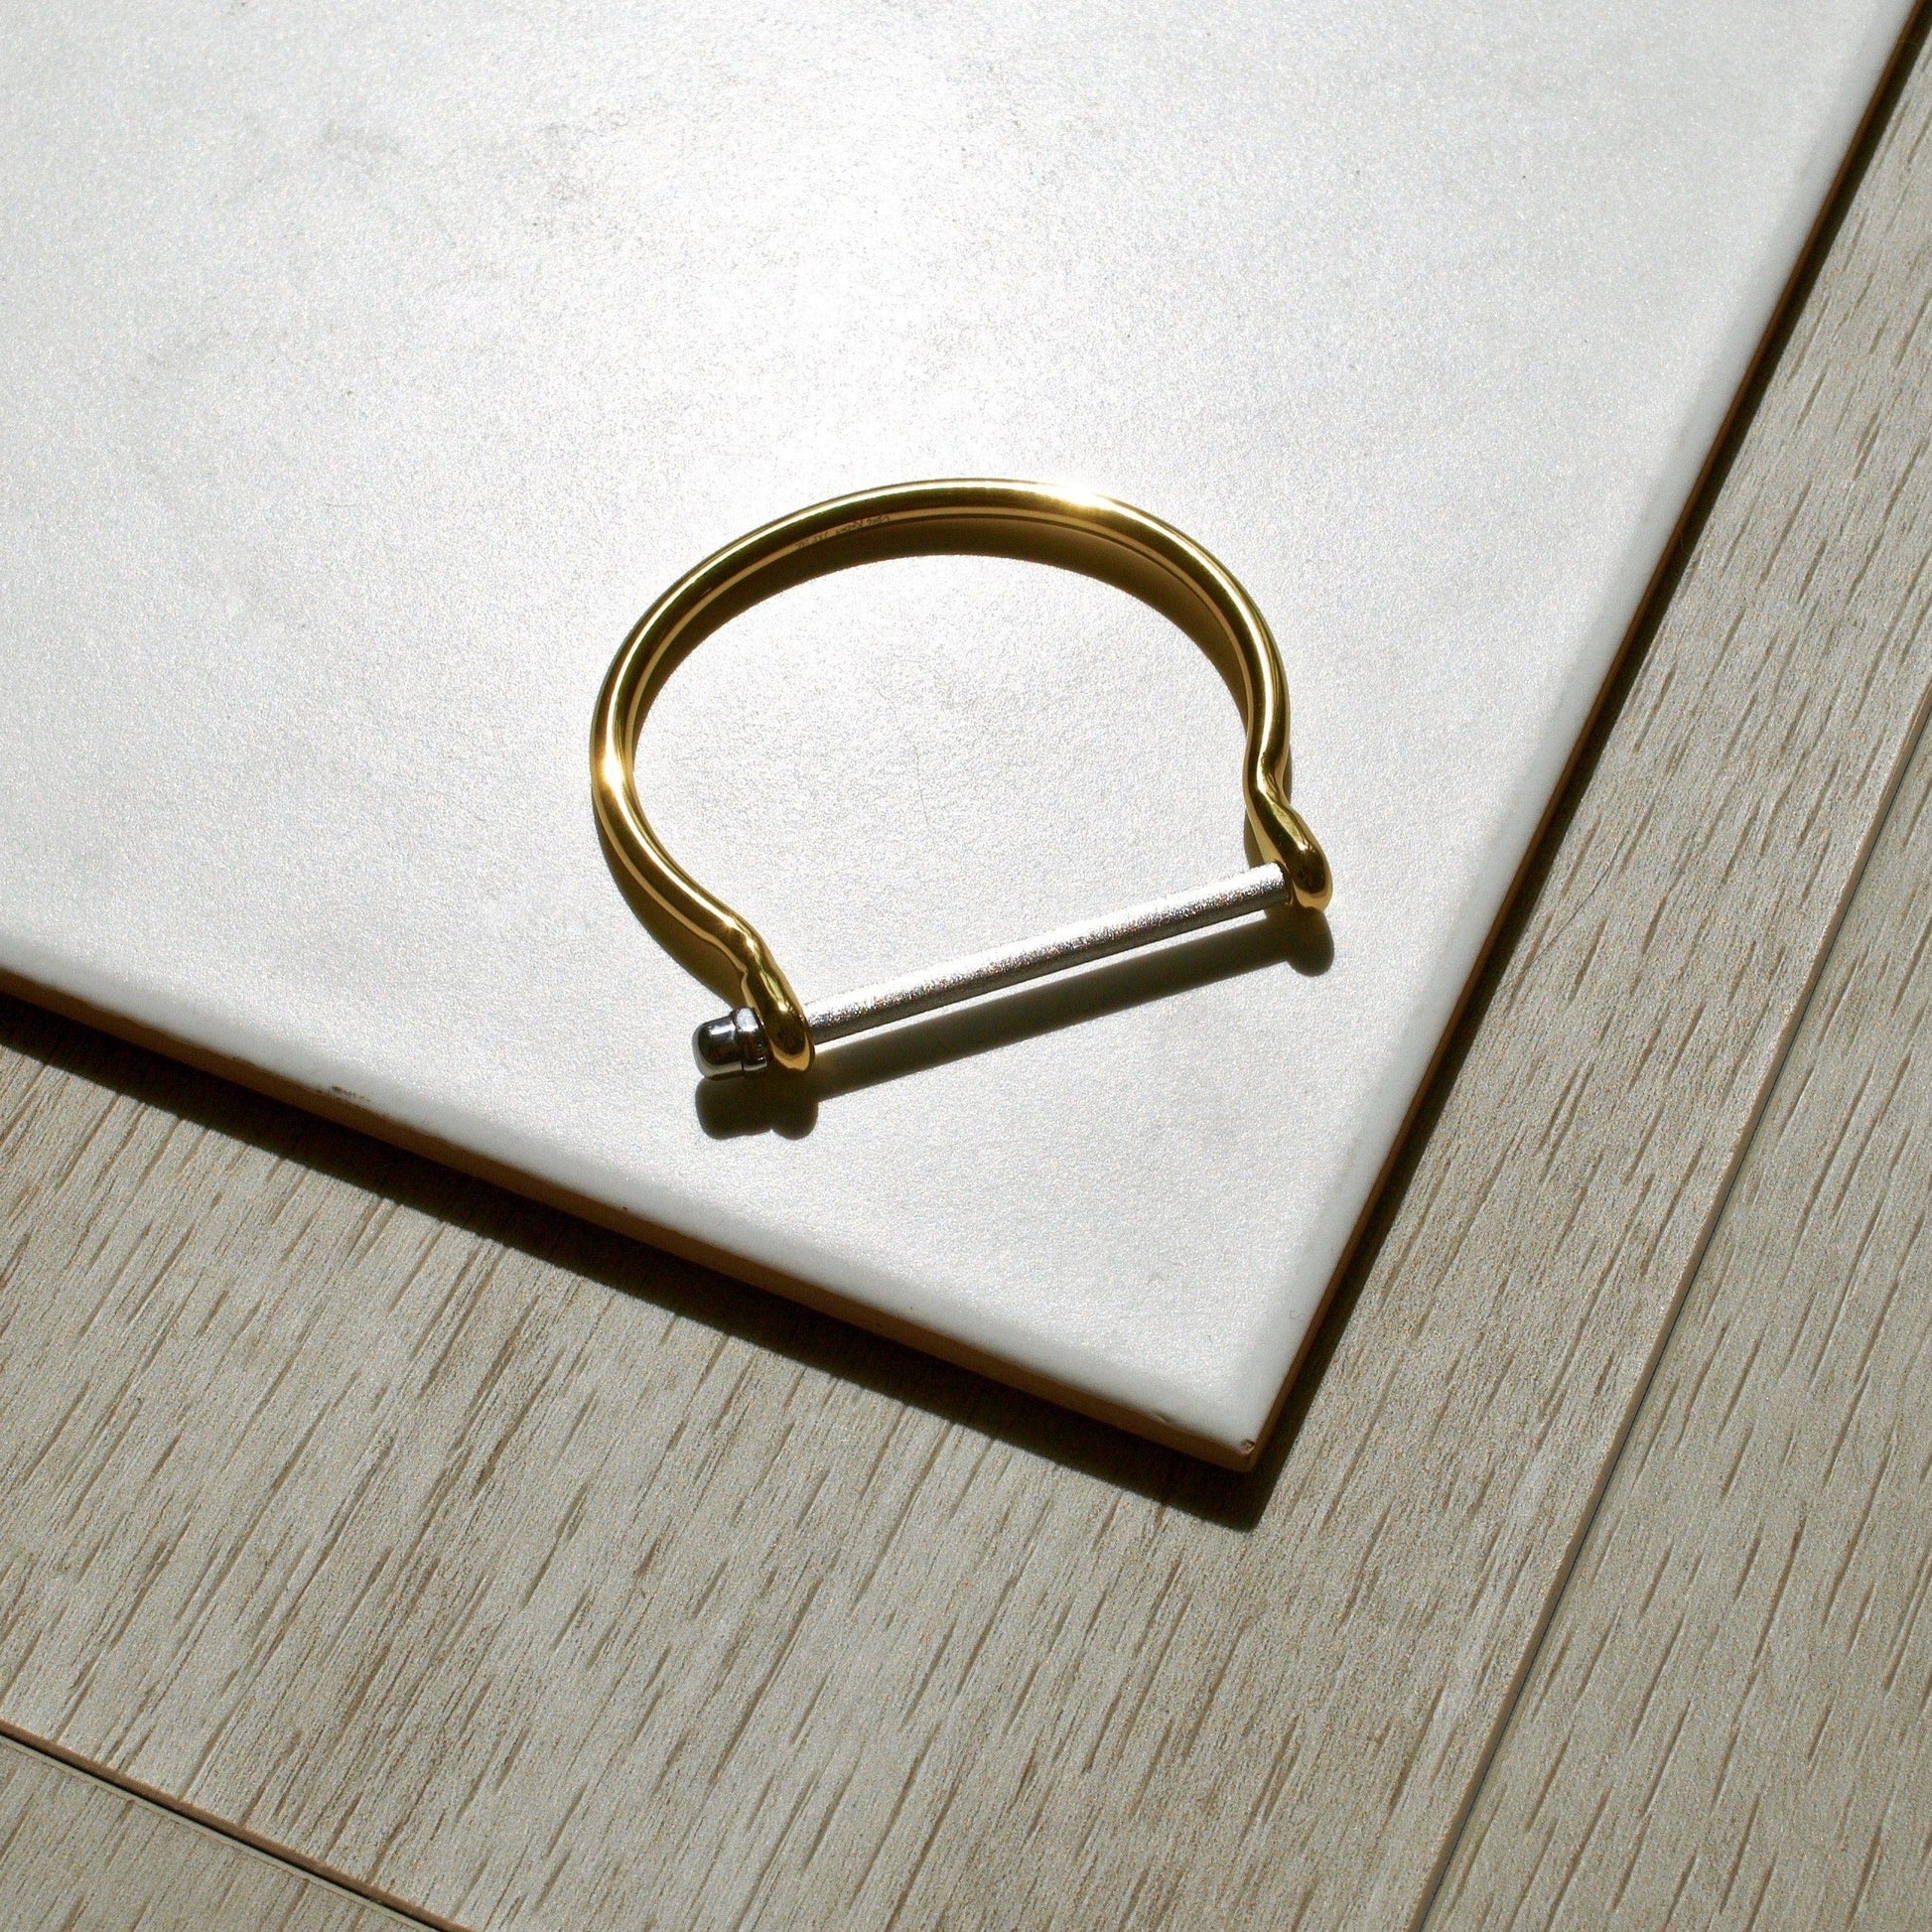 COMING SOON Frosted Gold Screw Cuff Bracelet - Opes Robur